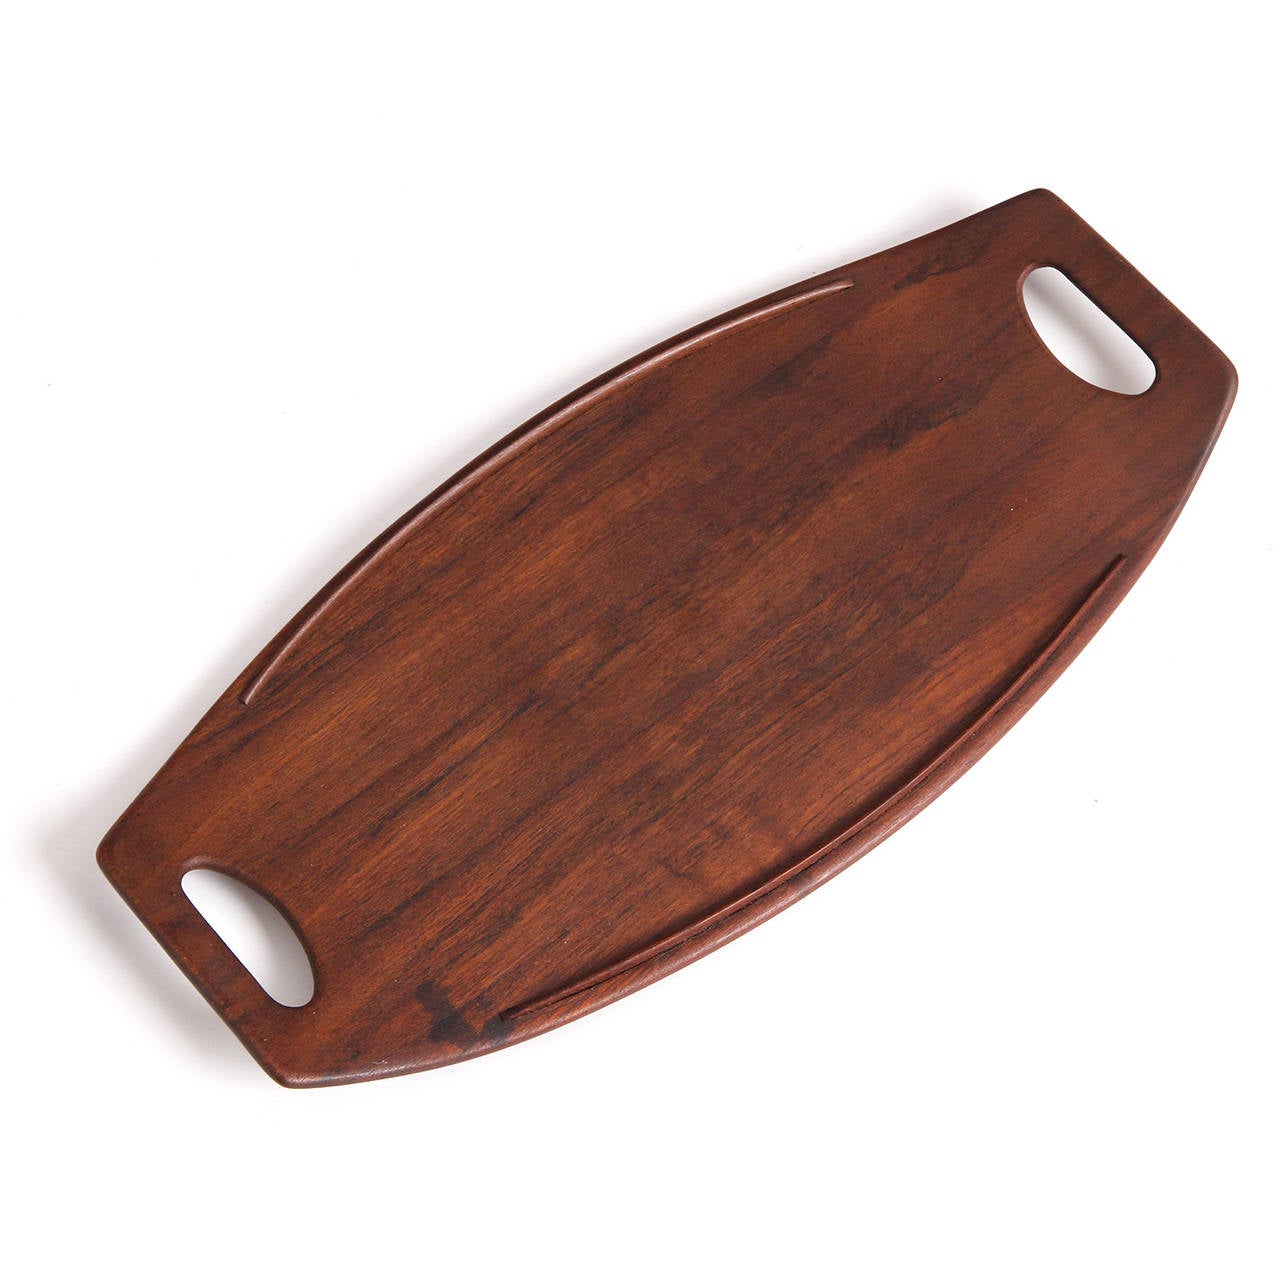 Mid-20th Century Rosewood Serving Tray by Jens Quistgaard